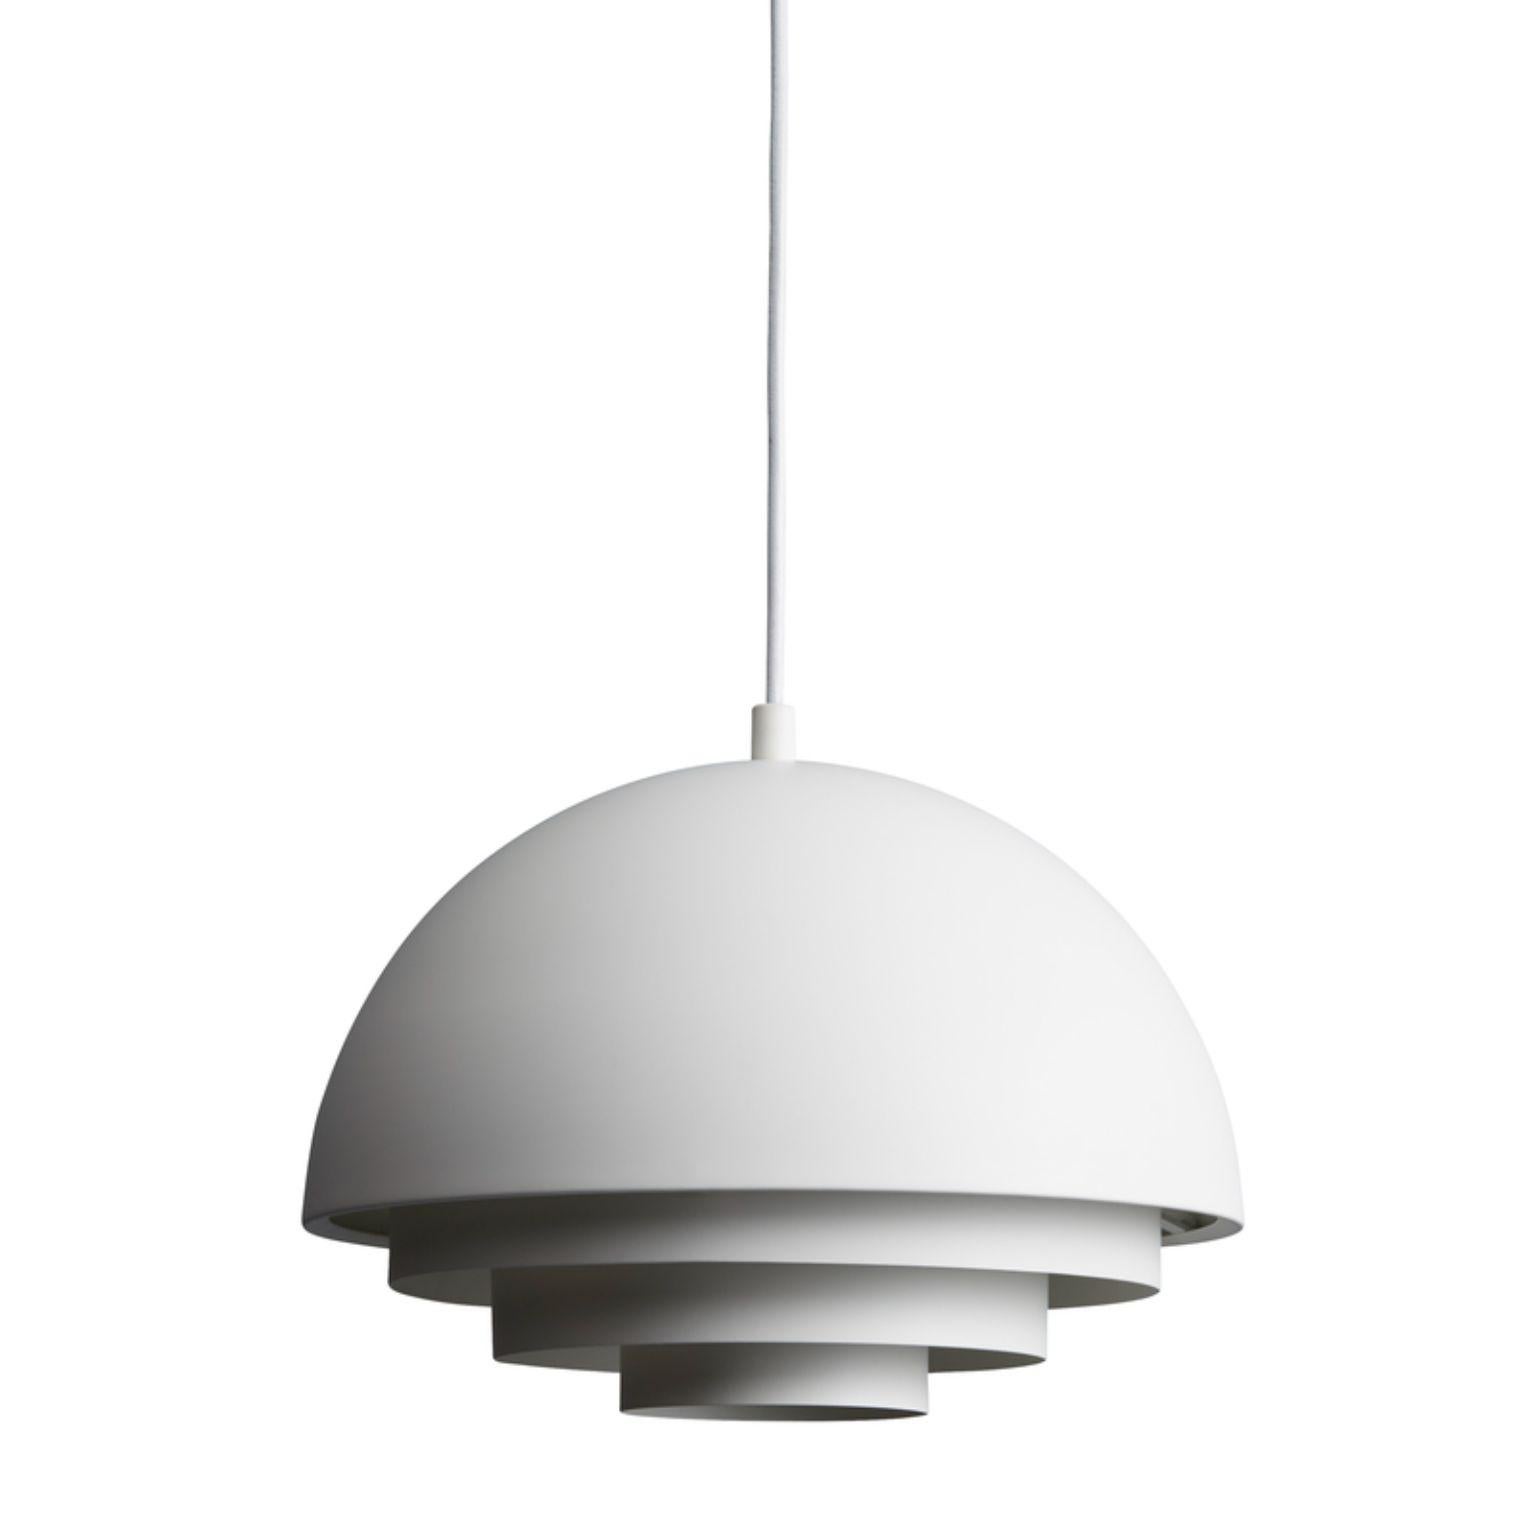 Milieu Colour Mini Pendant by Warm Nordic
Dimensions: D29 x H21.5 cm
Material: Clear white lacquered steel
Weight: 1 kg

Warm Nordic is an ambitious design brand anchored in Nordic design history and with a timeless, aesthetic style that